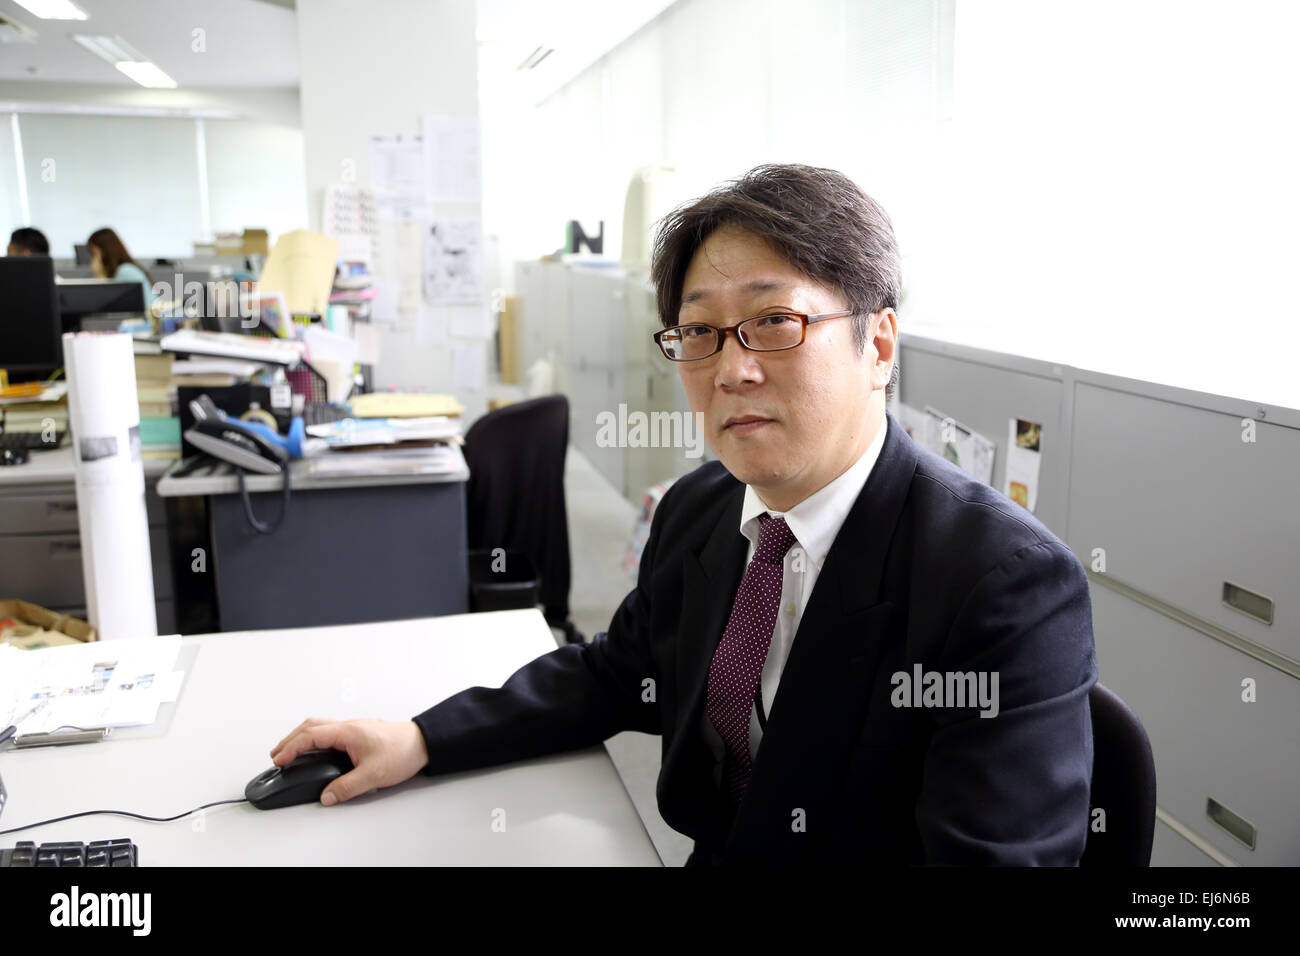 Japanese Boss In Office High Resolution Stock Photography and Images - Alamy